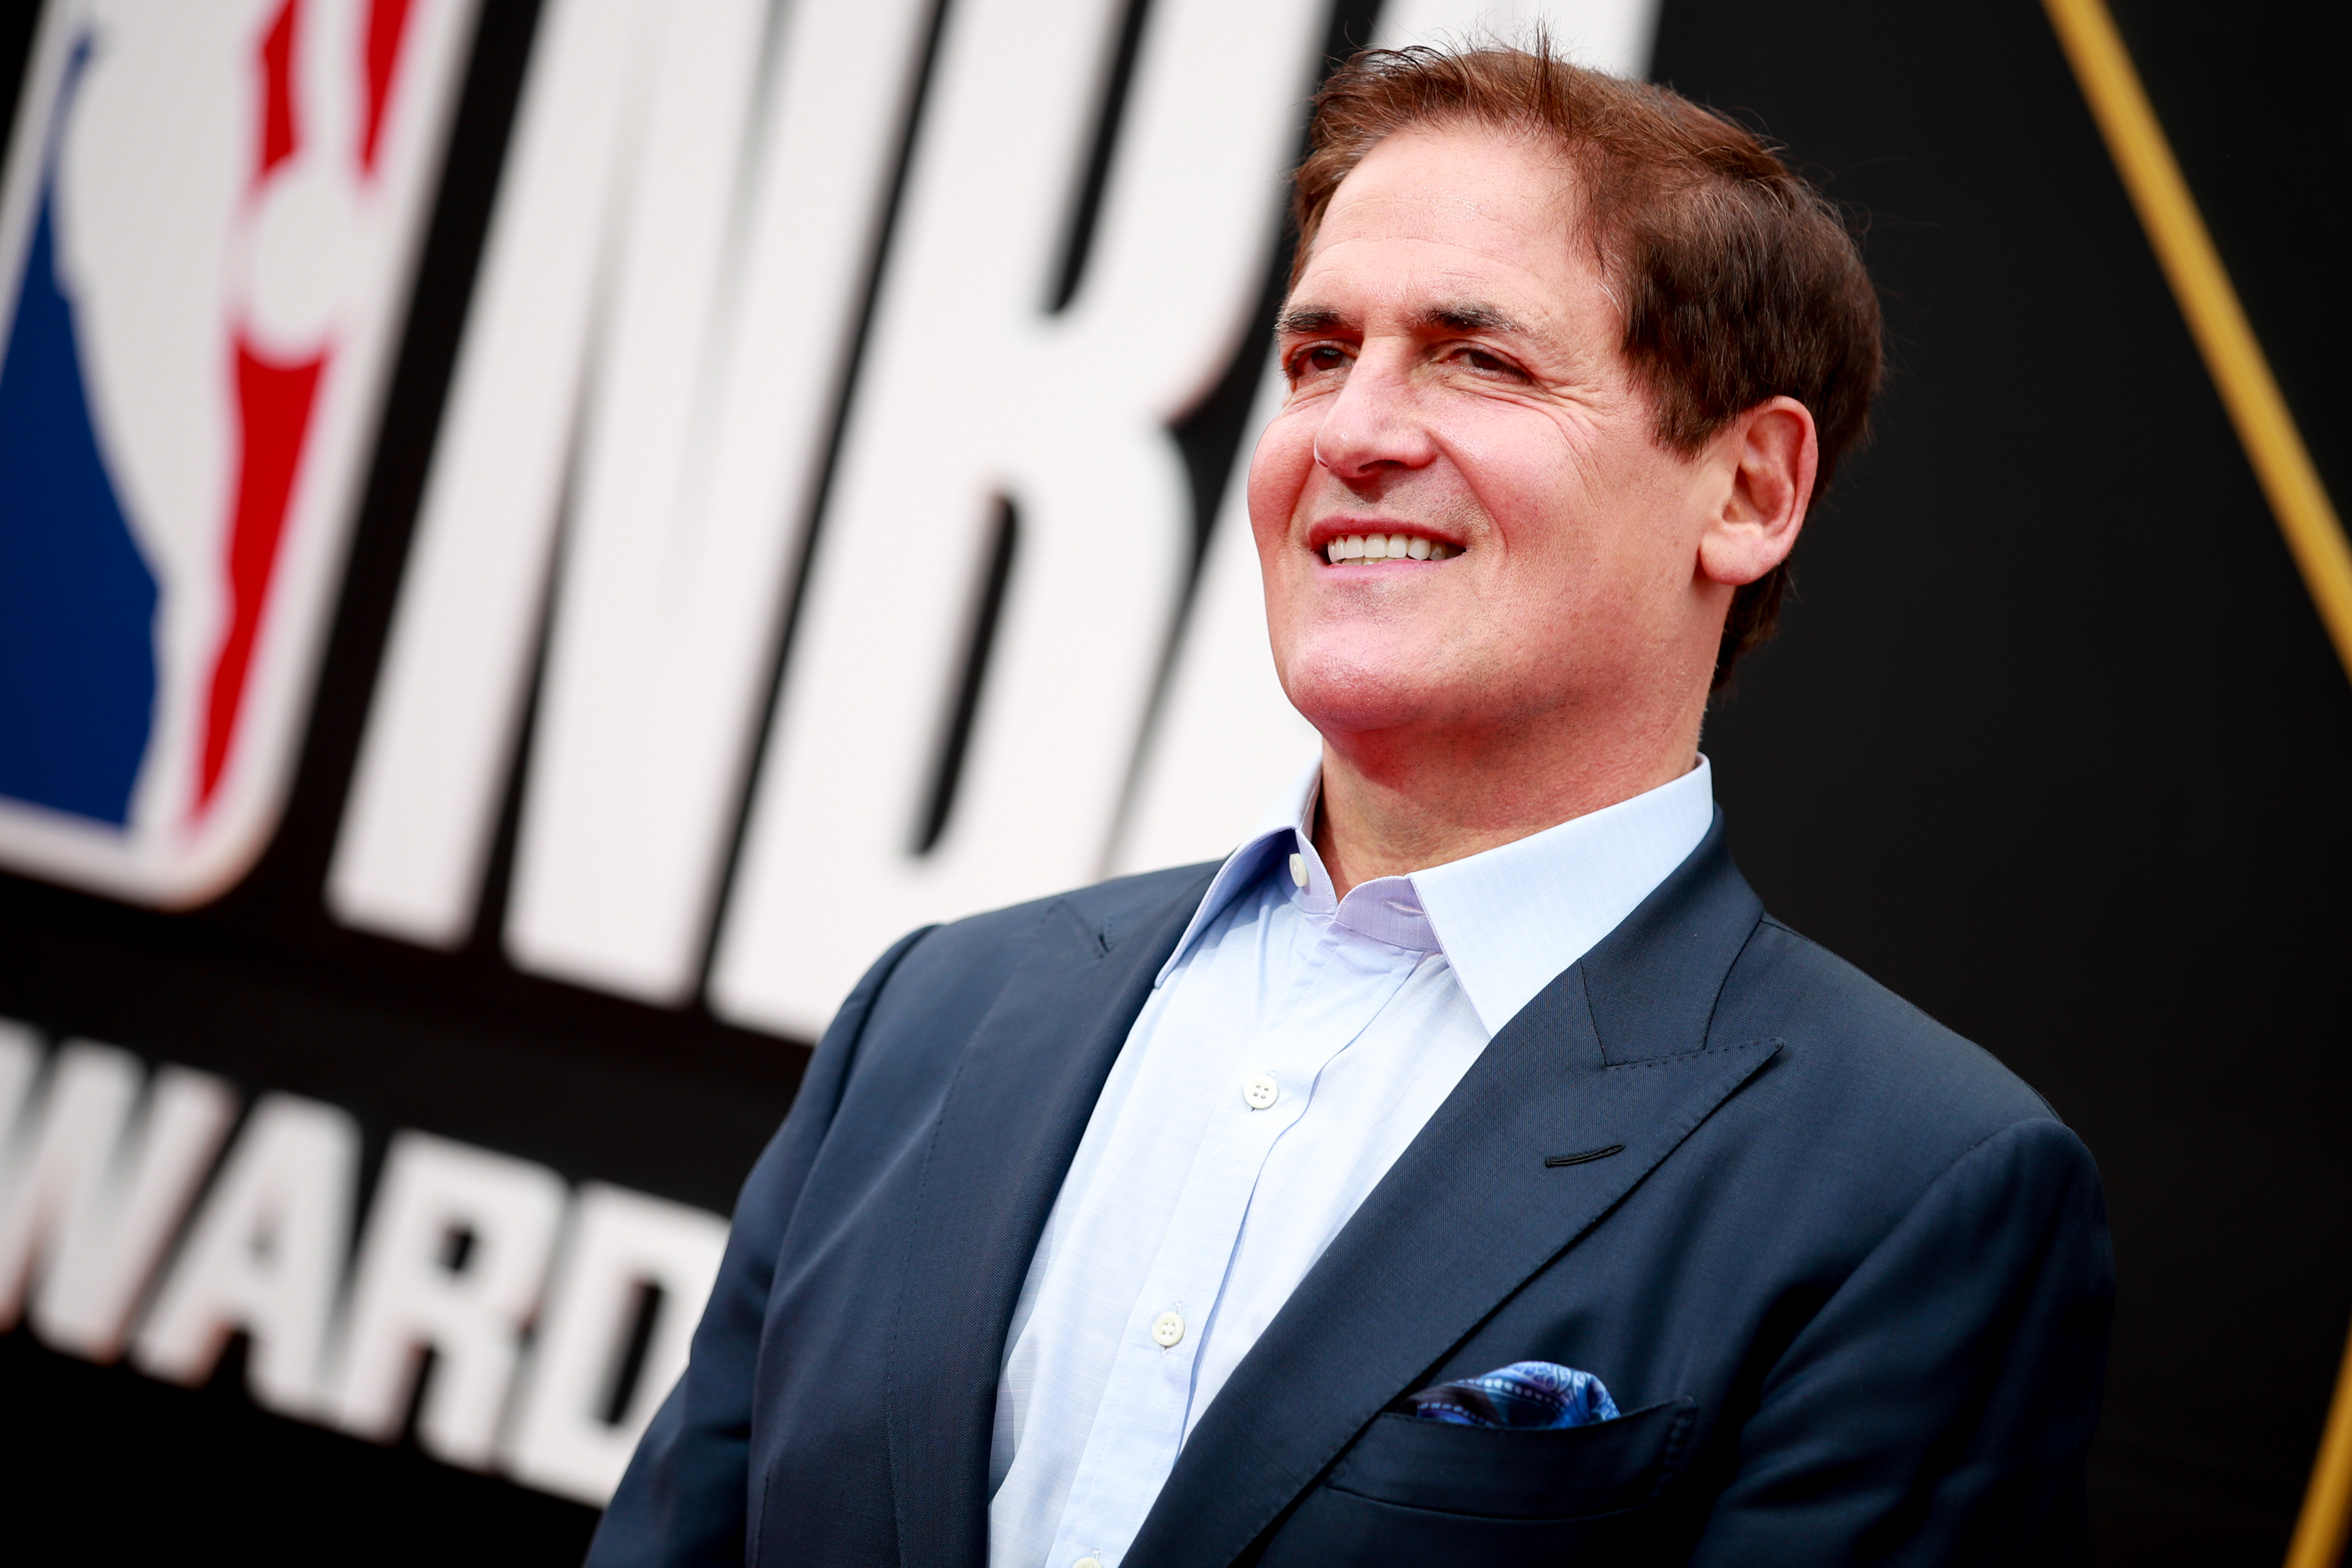 Mark Cuban Wants the $100B Left in PPP Funding to go Toward Black-Owned Businesses